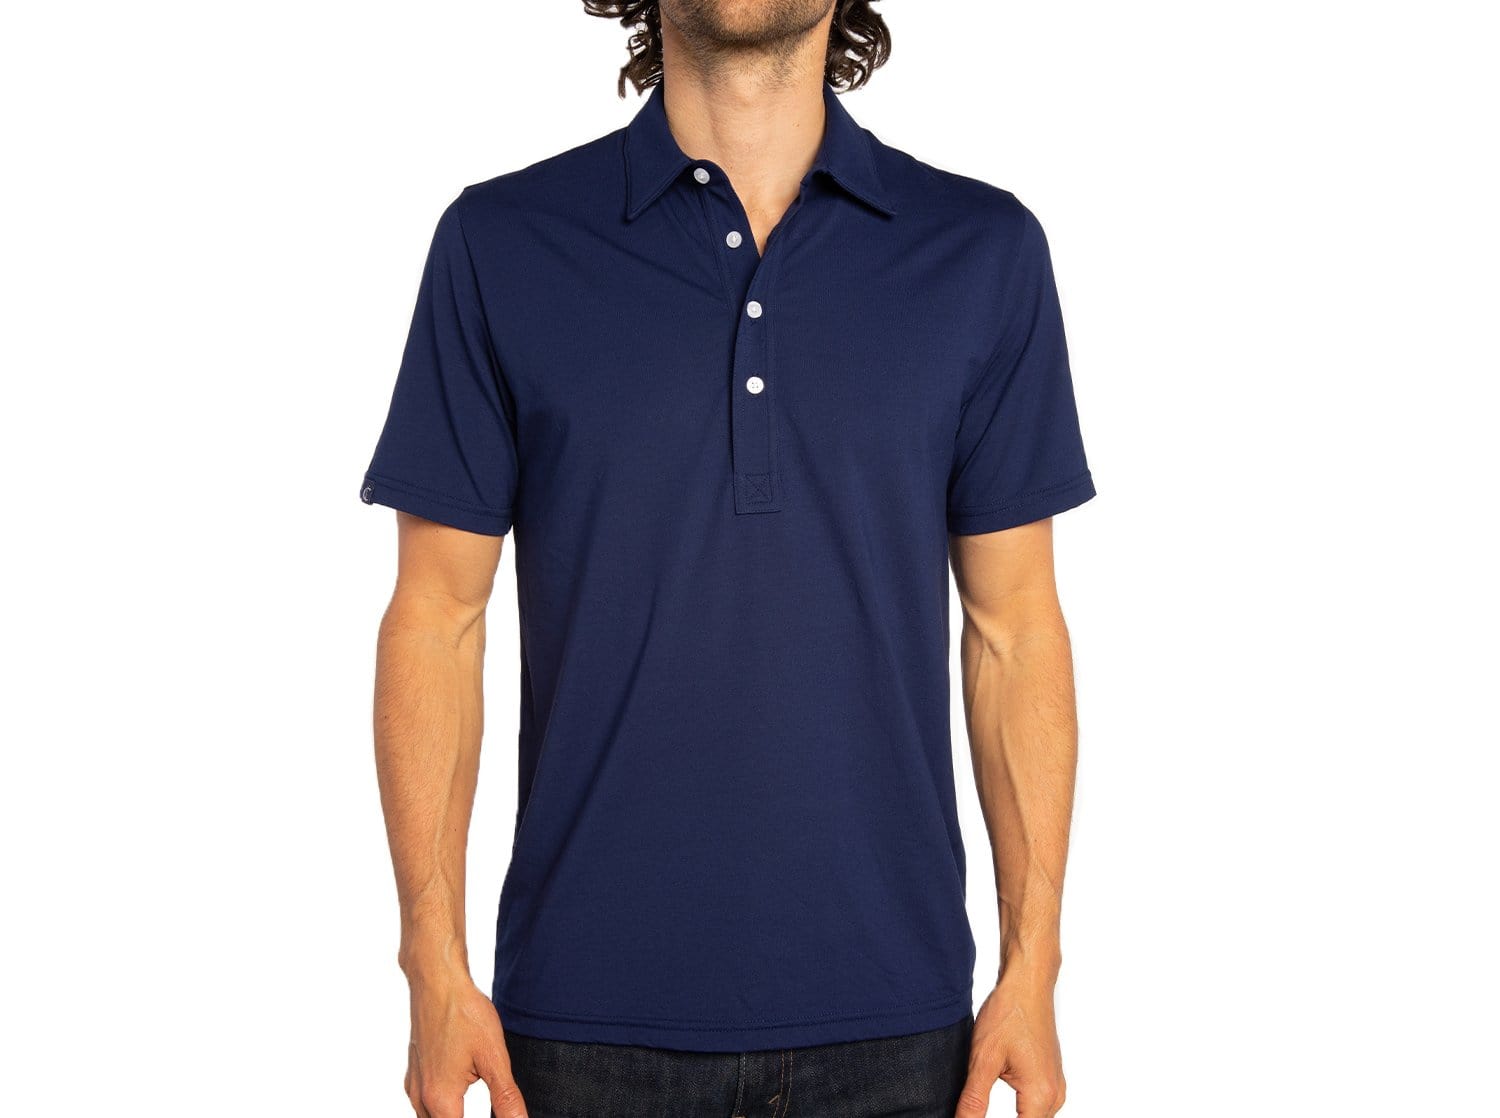 Performance Range Polo - In The Navy